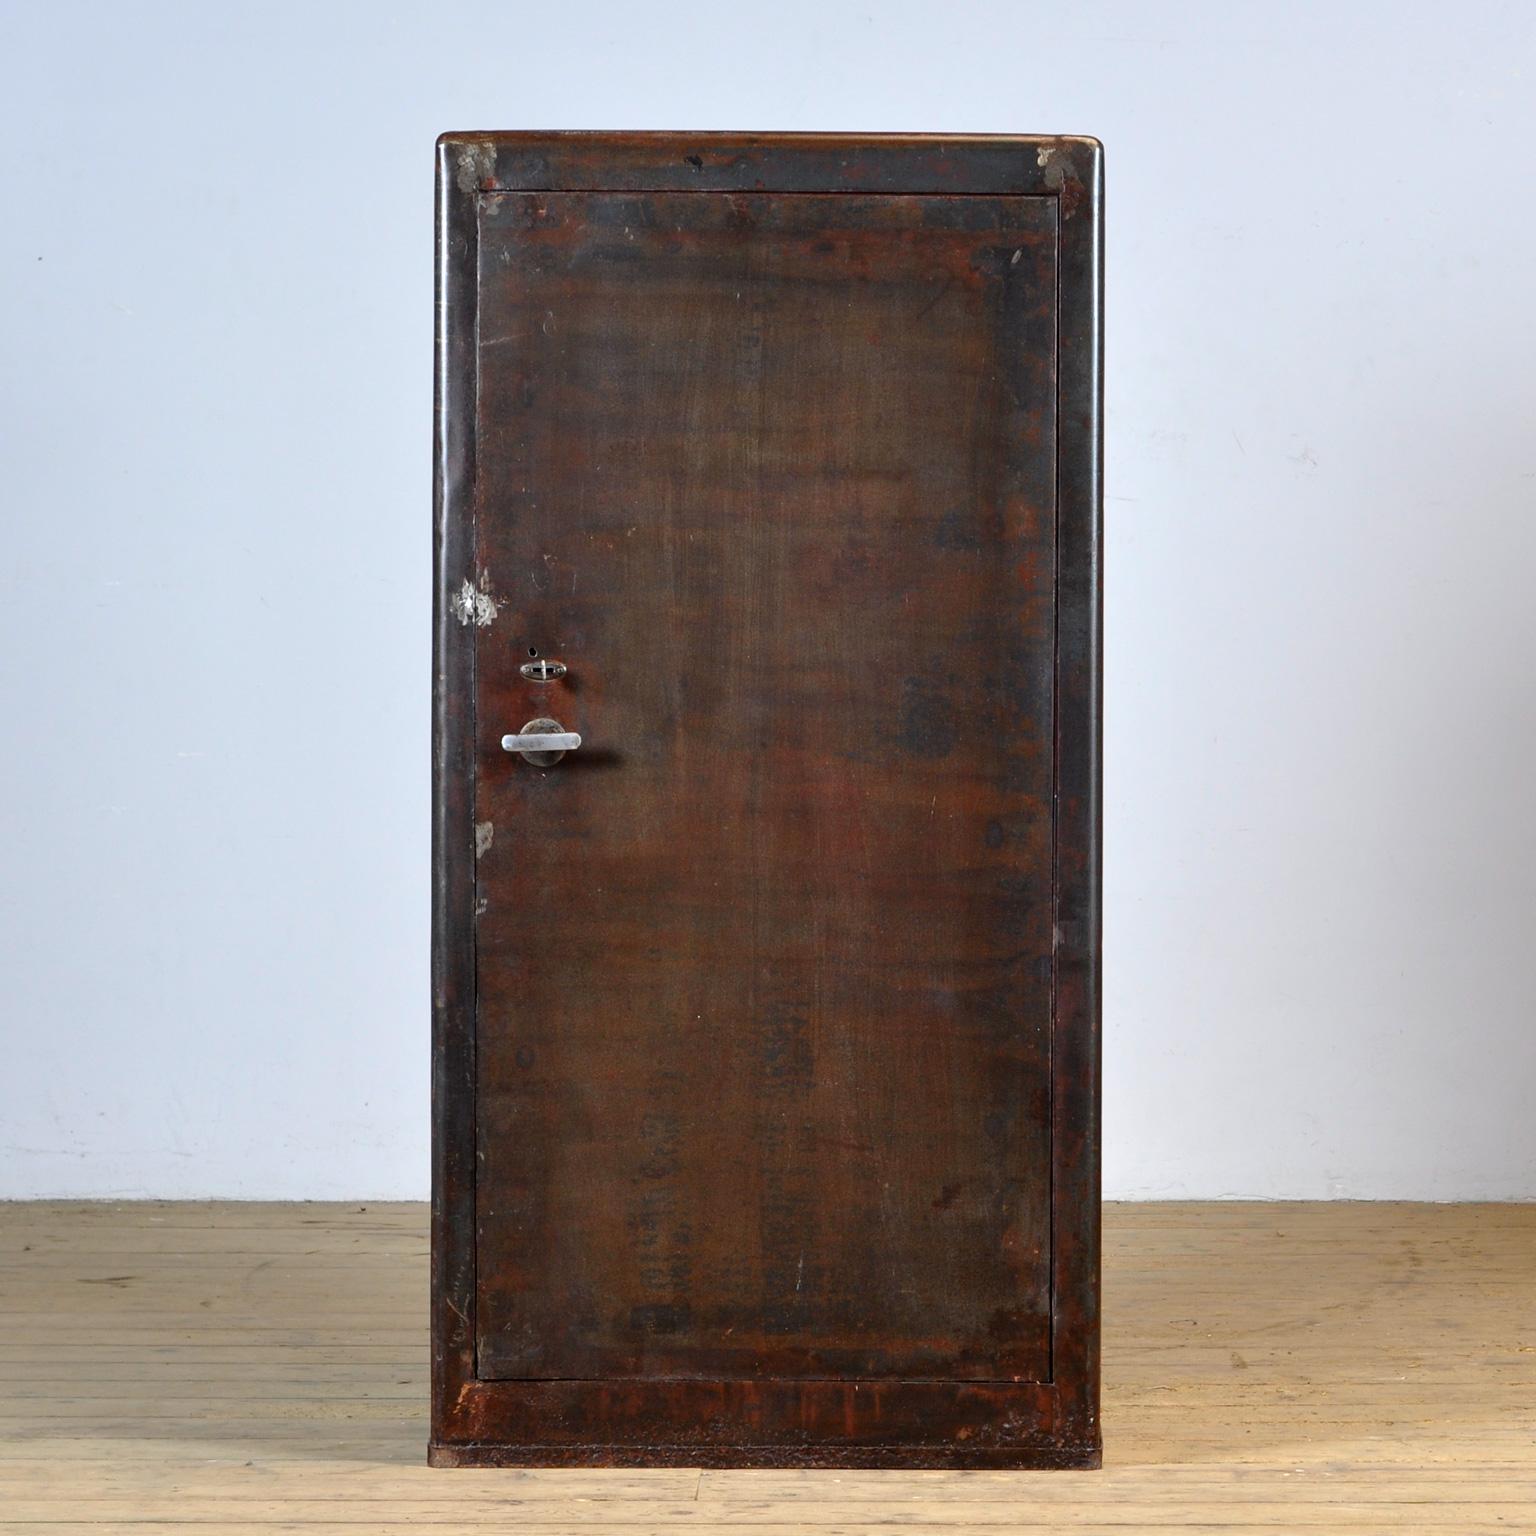 Industrial cabinet from the 1960s, made of metal with 3 adjustable shelves on the inside. The cabinet has been treated against rust and finished with transparent lacquer. The surface is smooth and clean. With well-functioning lock/key. Heavy